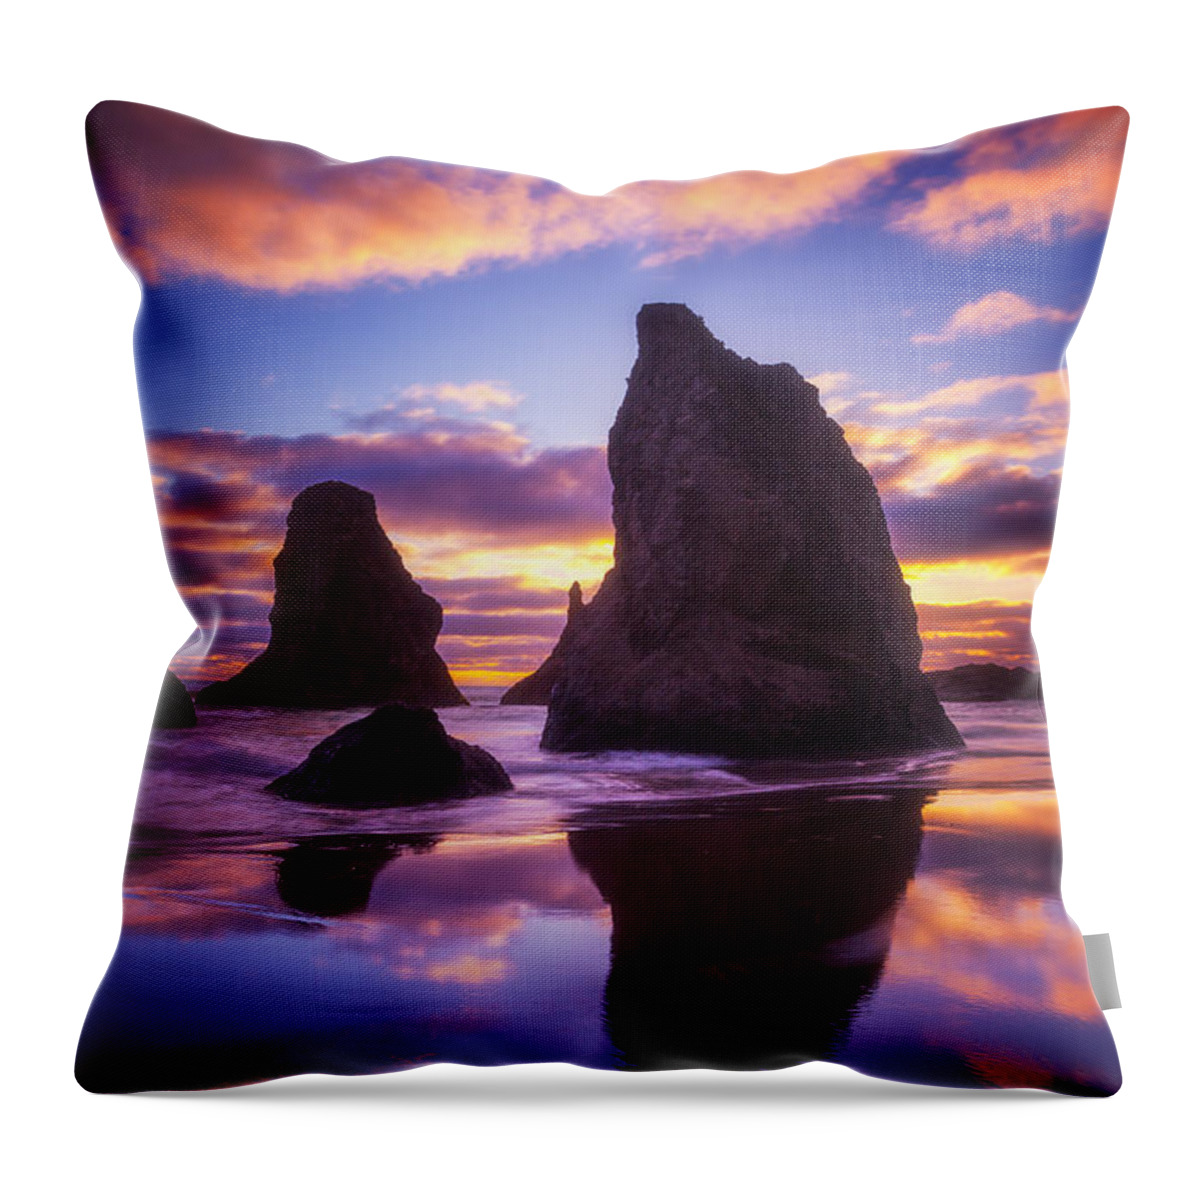 Sunset Throw Pillow featuring the photograph Bandon's Sunset Light Show by Darren White